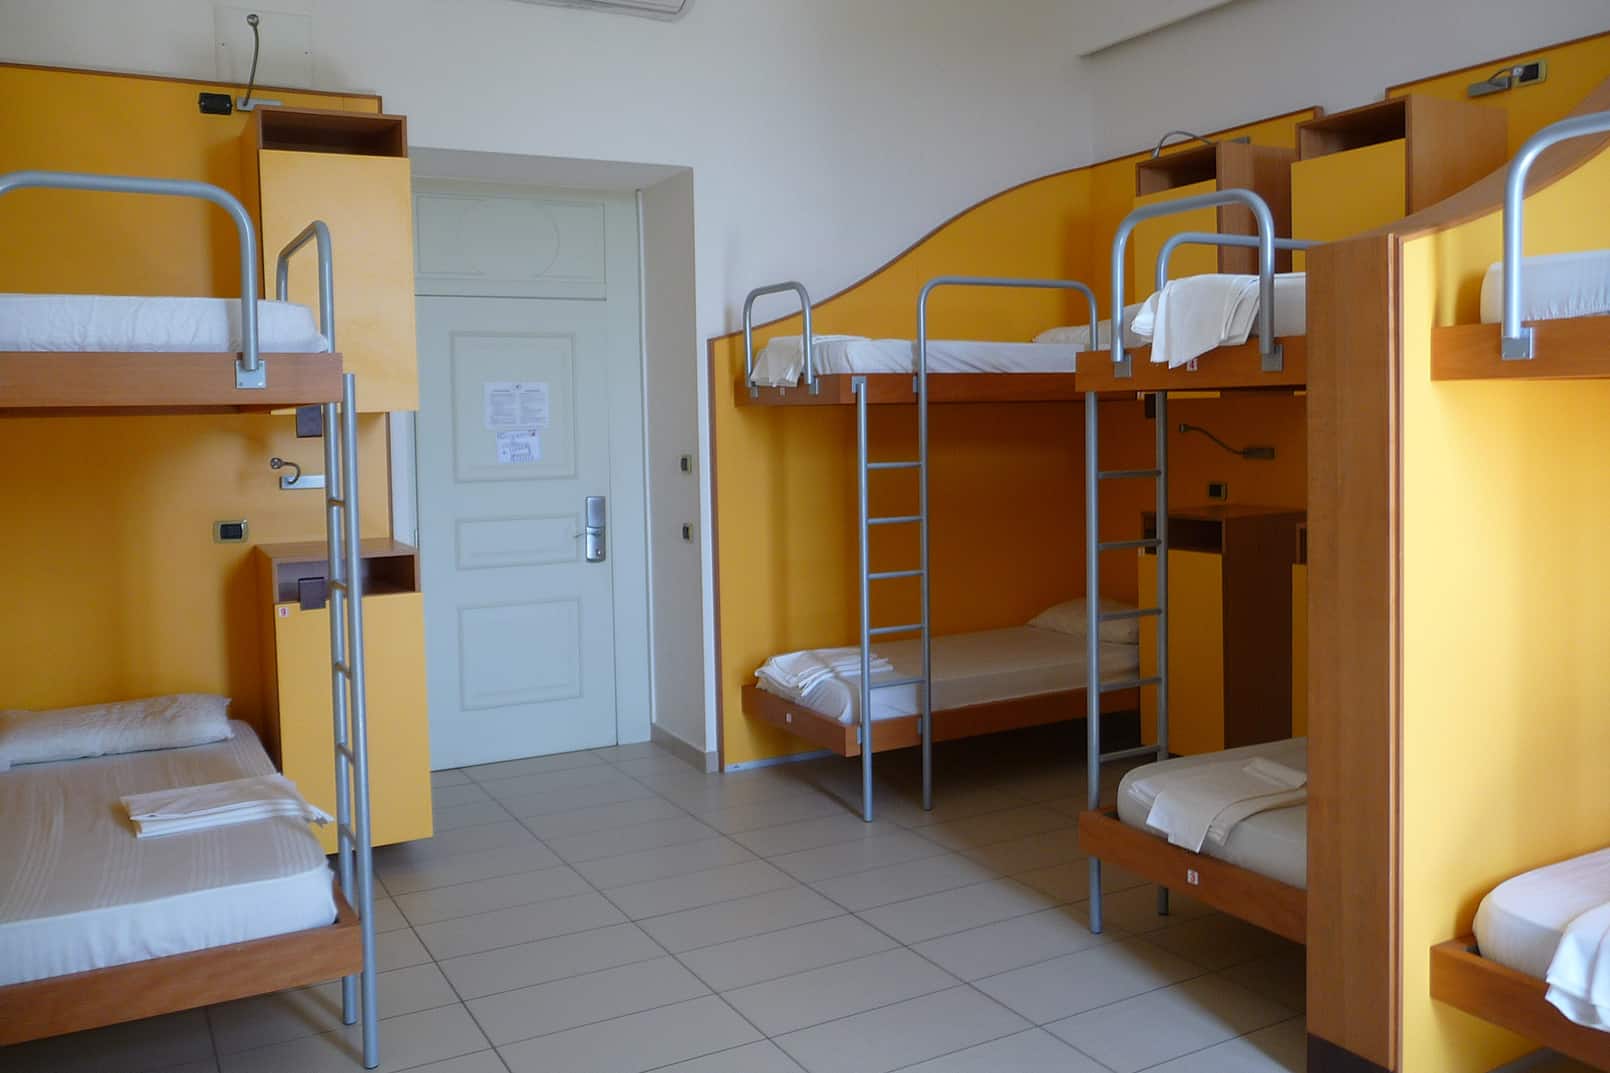 Do Hostels Provide Bedding Such As Sheets, Pillows and Blankets